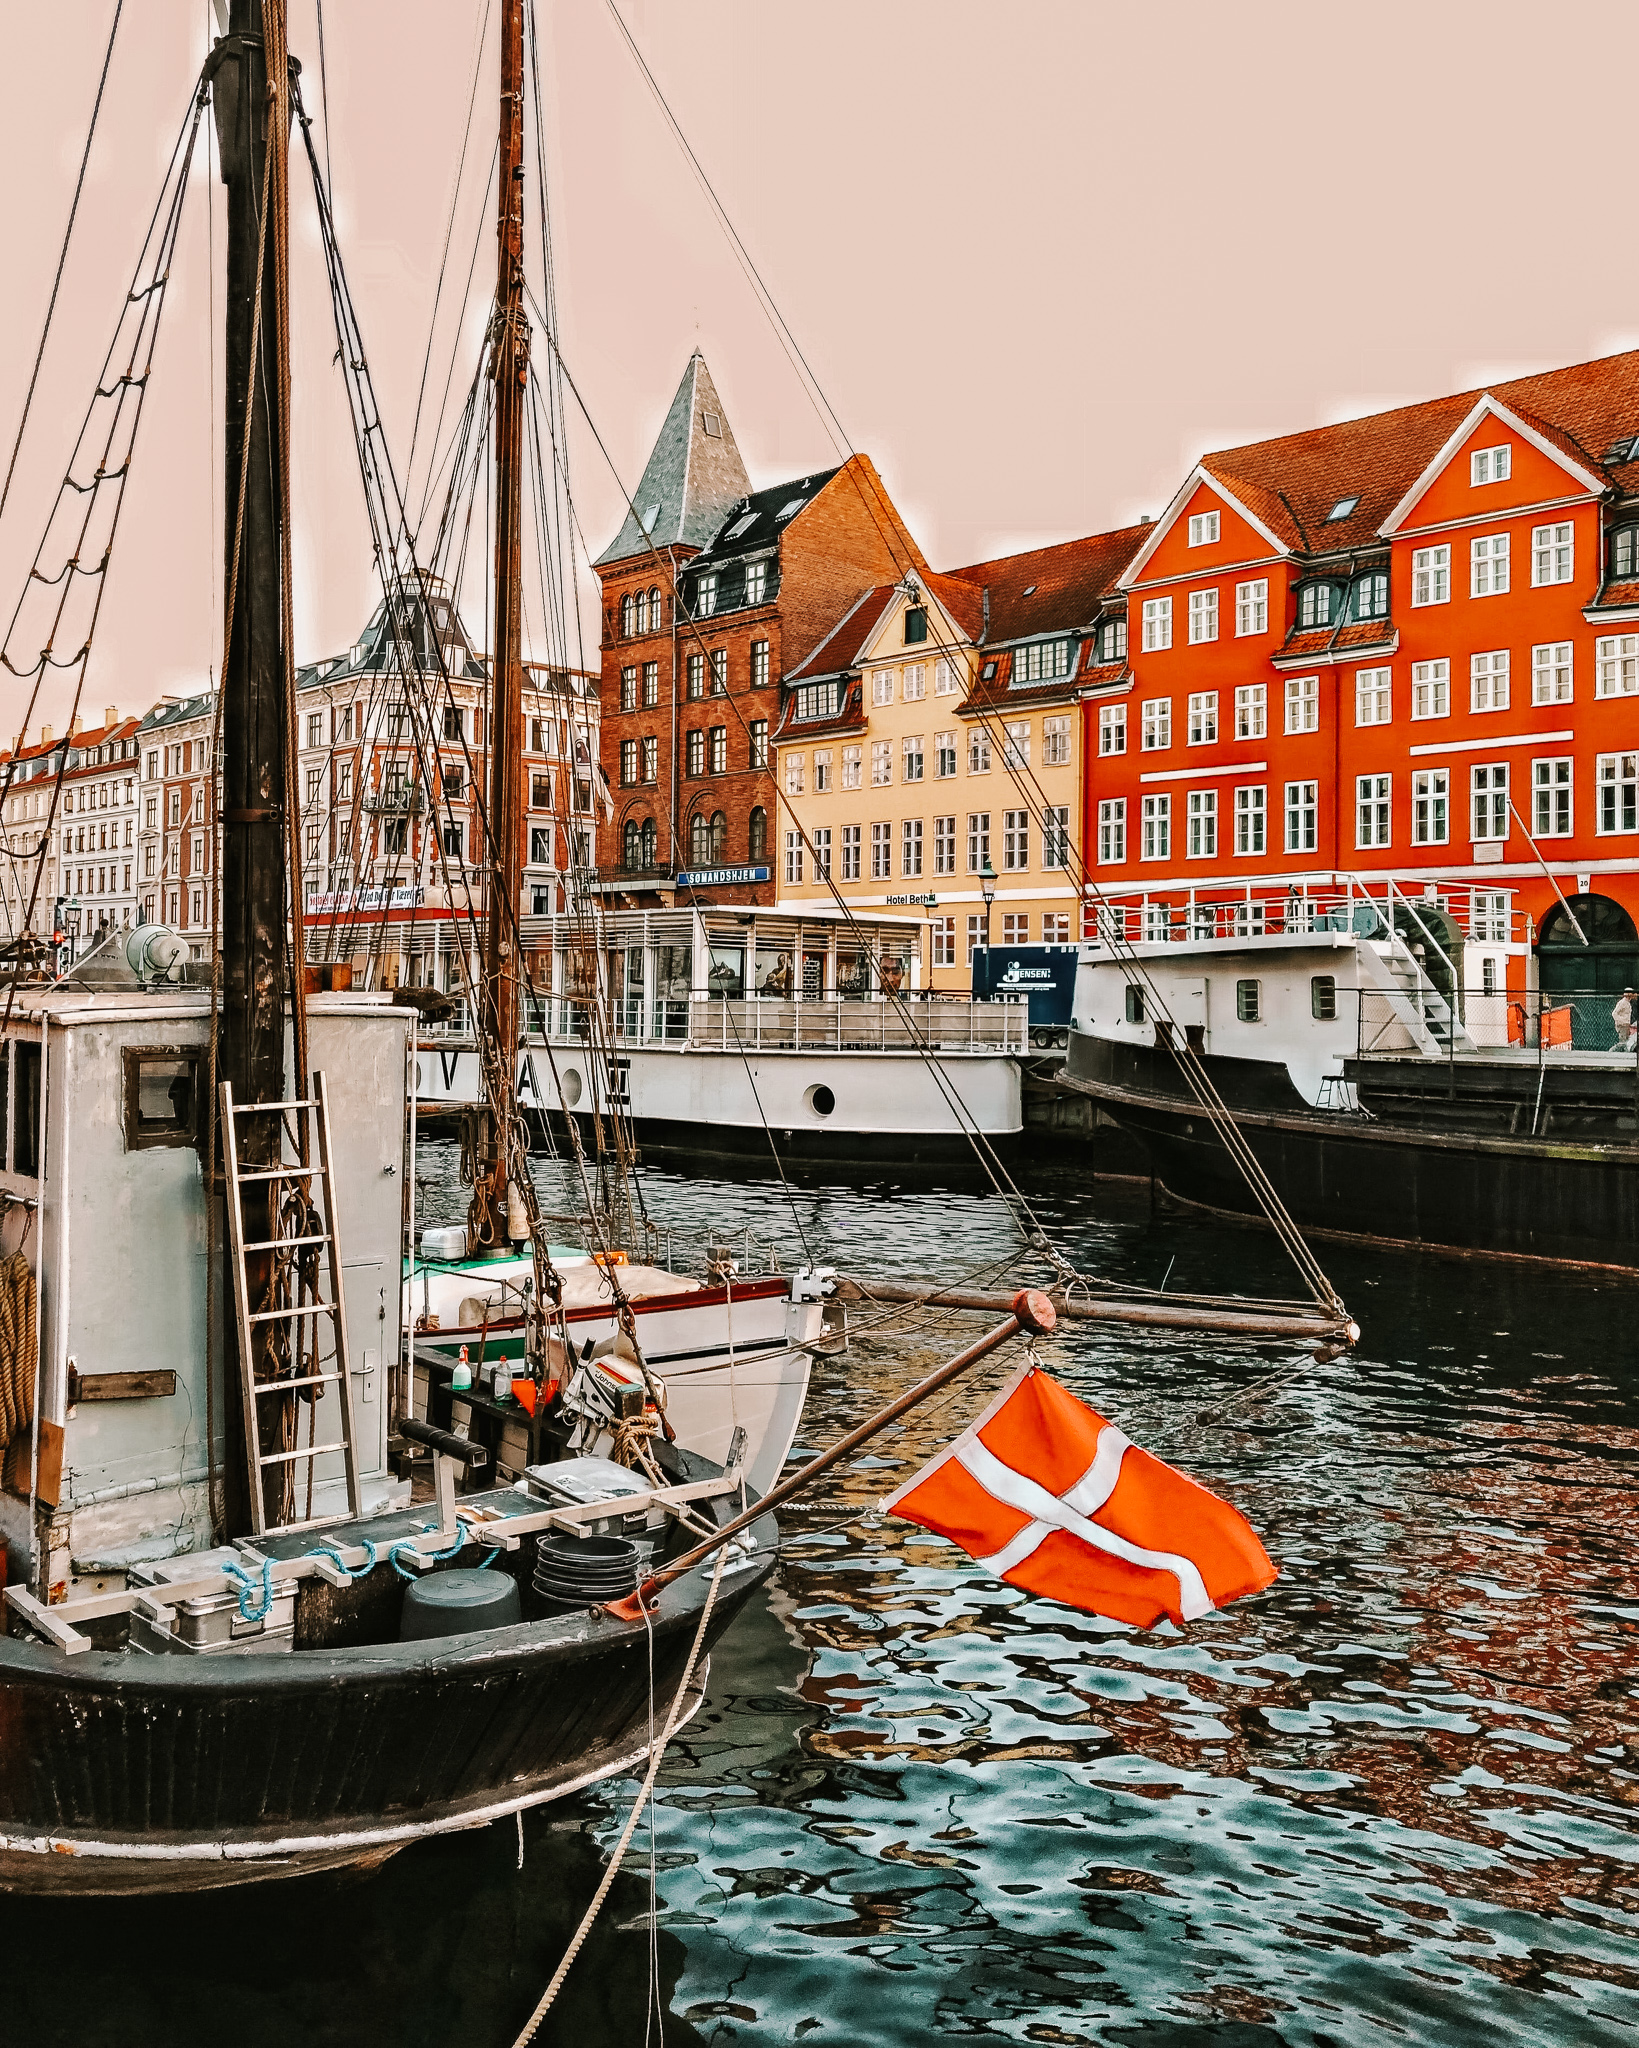 A boat in a canal, with the flag of Denmark on the front-end, with the colorful fisherman houses of Copenhagen in the background.